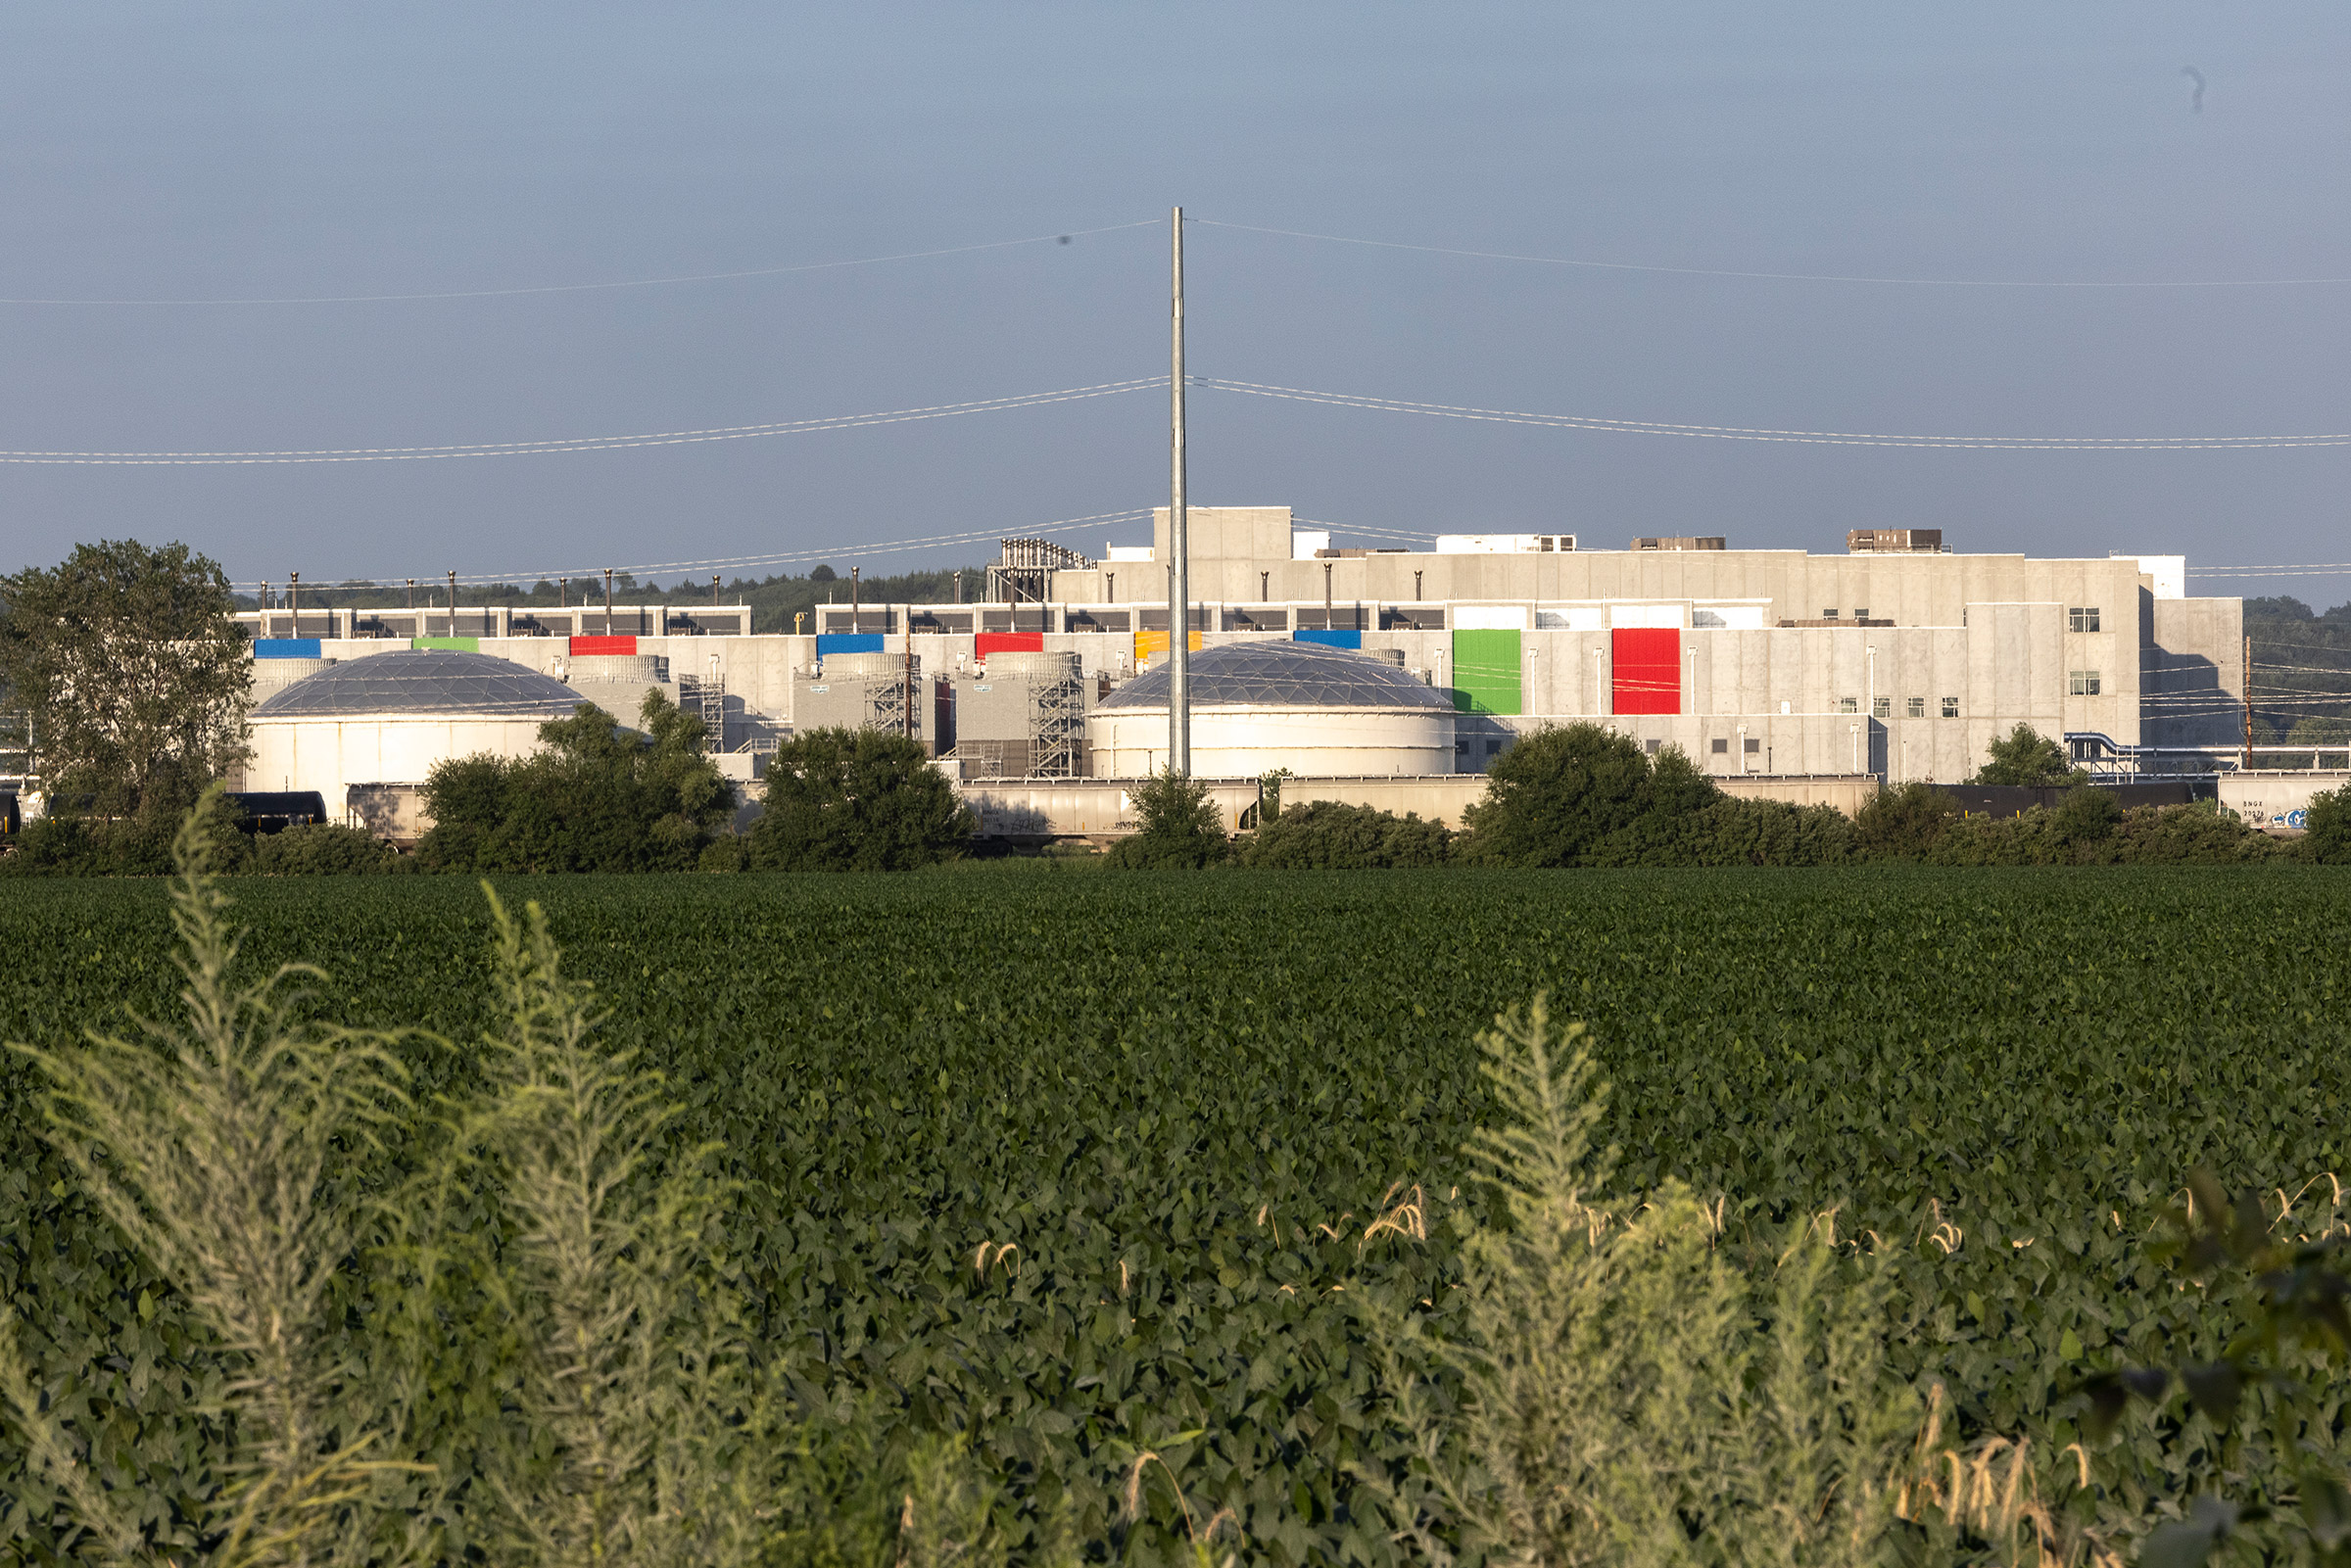 The Google data center in Council Bluffs, Iowa, on July 29, 2021. (Kathryn Gamble for TIME)